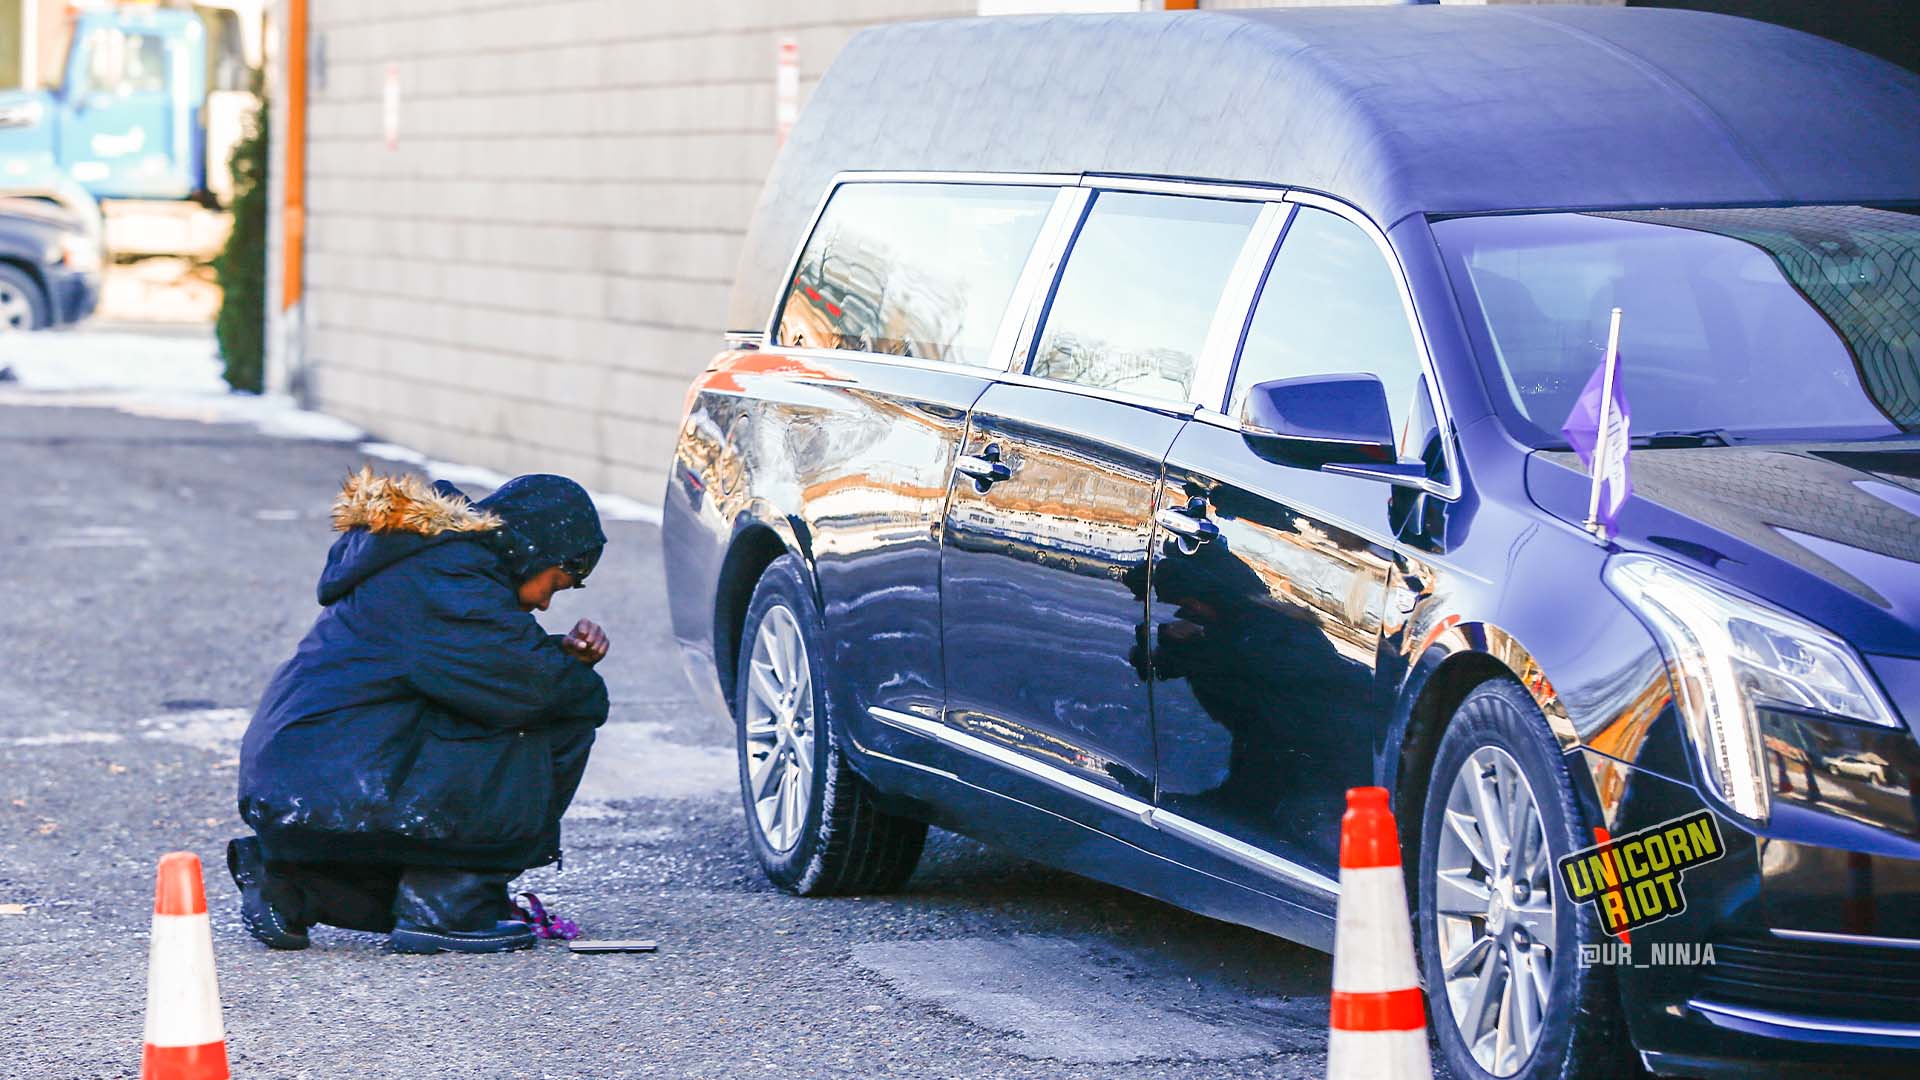 February 17, 2022, Minneapolis, MN: Someone prays outside of the hearse containing the casket with Amir Locke in it before the funeral at Shiloh Temple.